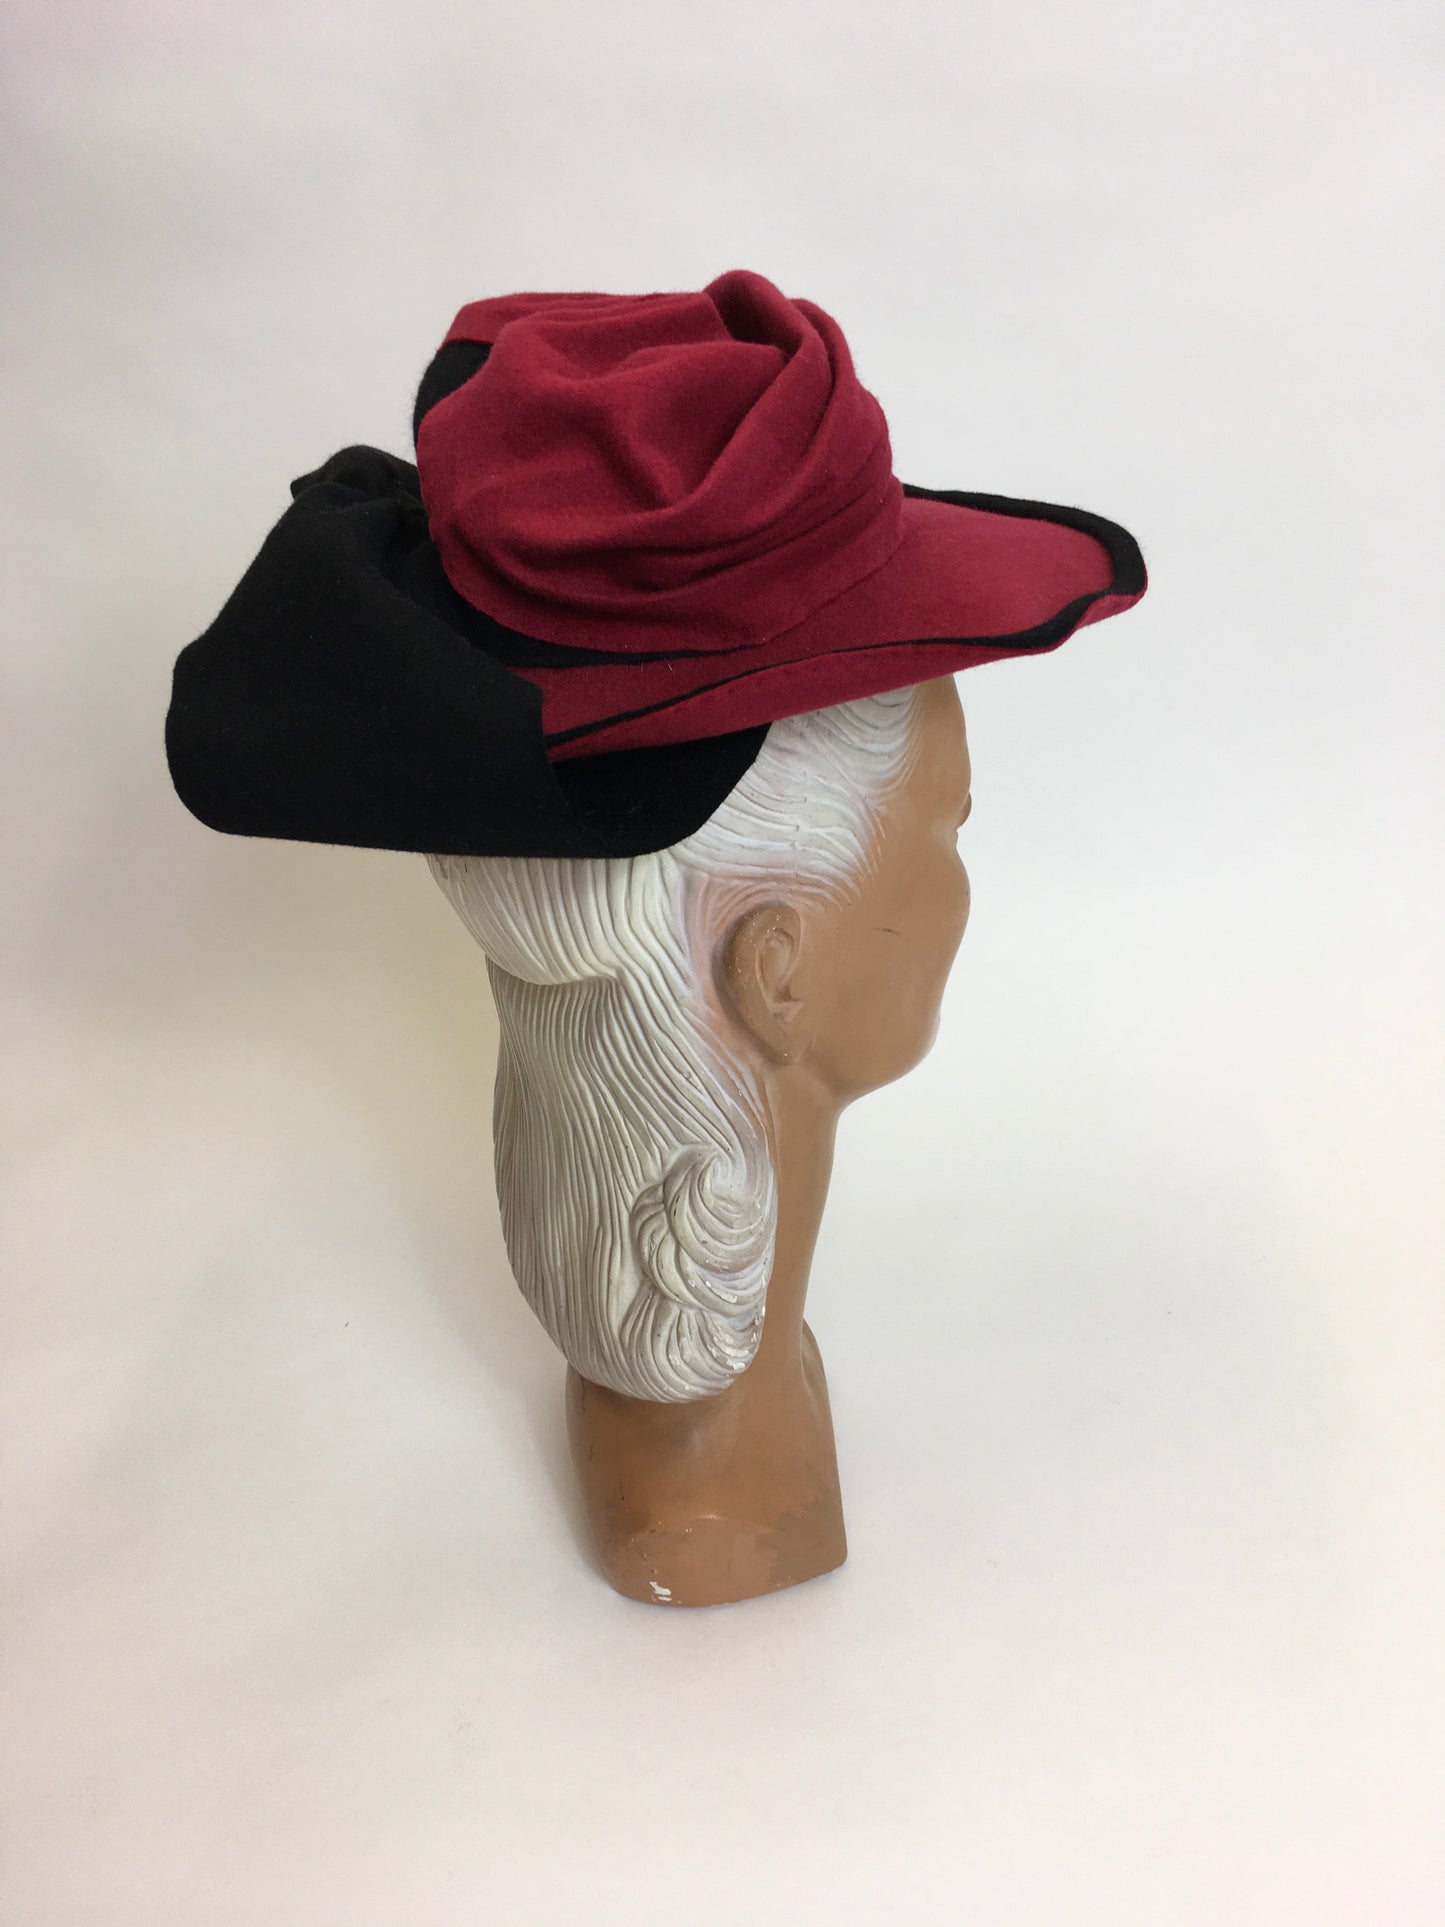 Original 1940’s Felt Topper Hat - In a Raspberry Red with Black Detailing